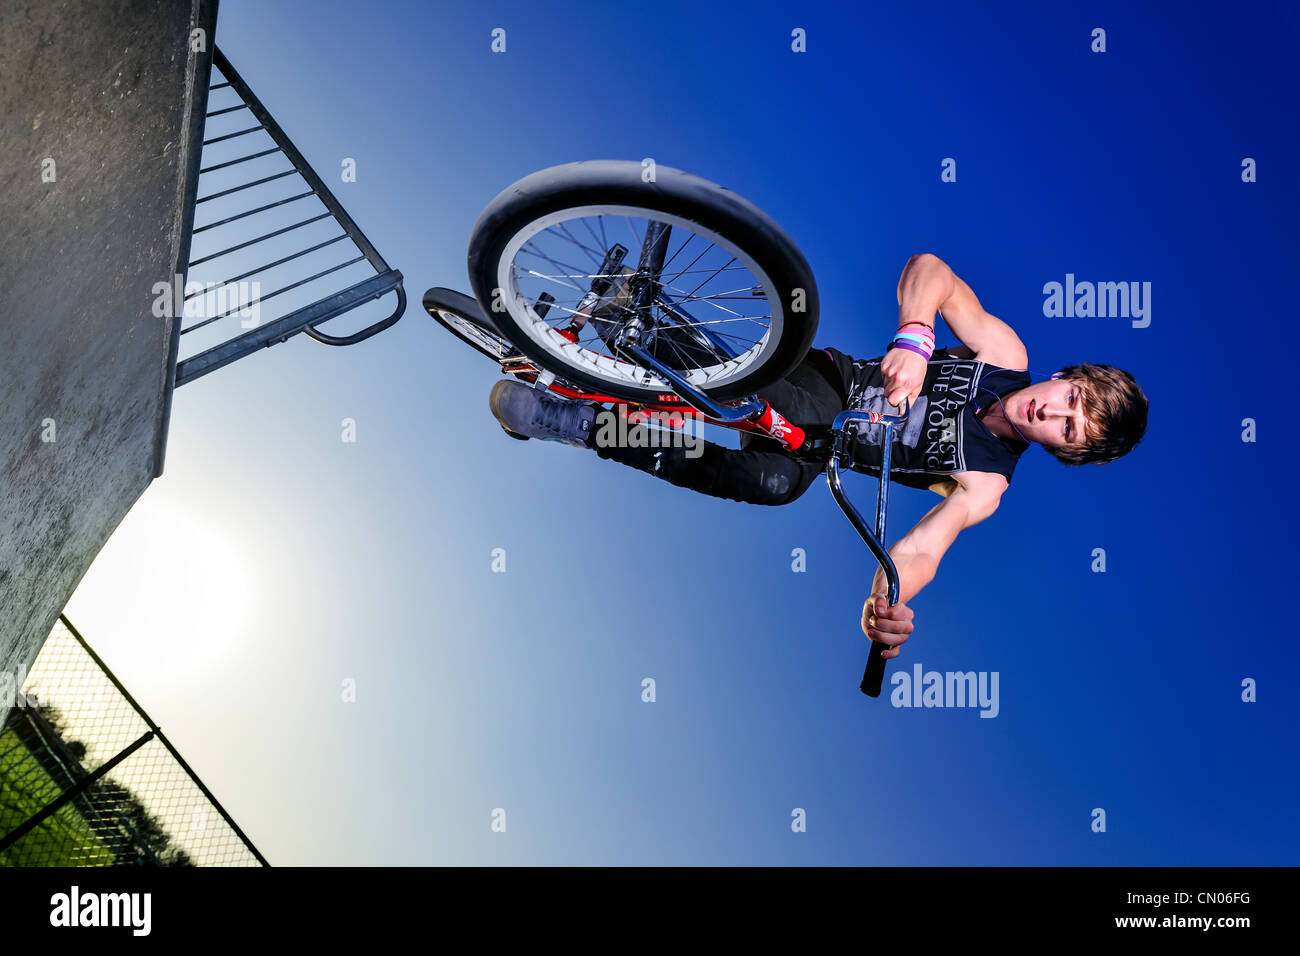 Free Images : air, vehicle, action, extreme sport, mountain bike ...